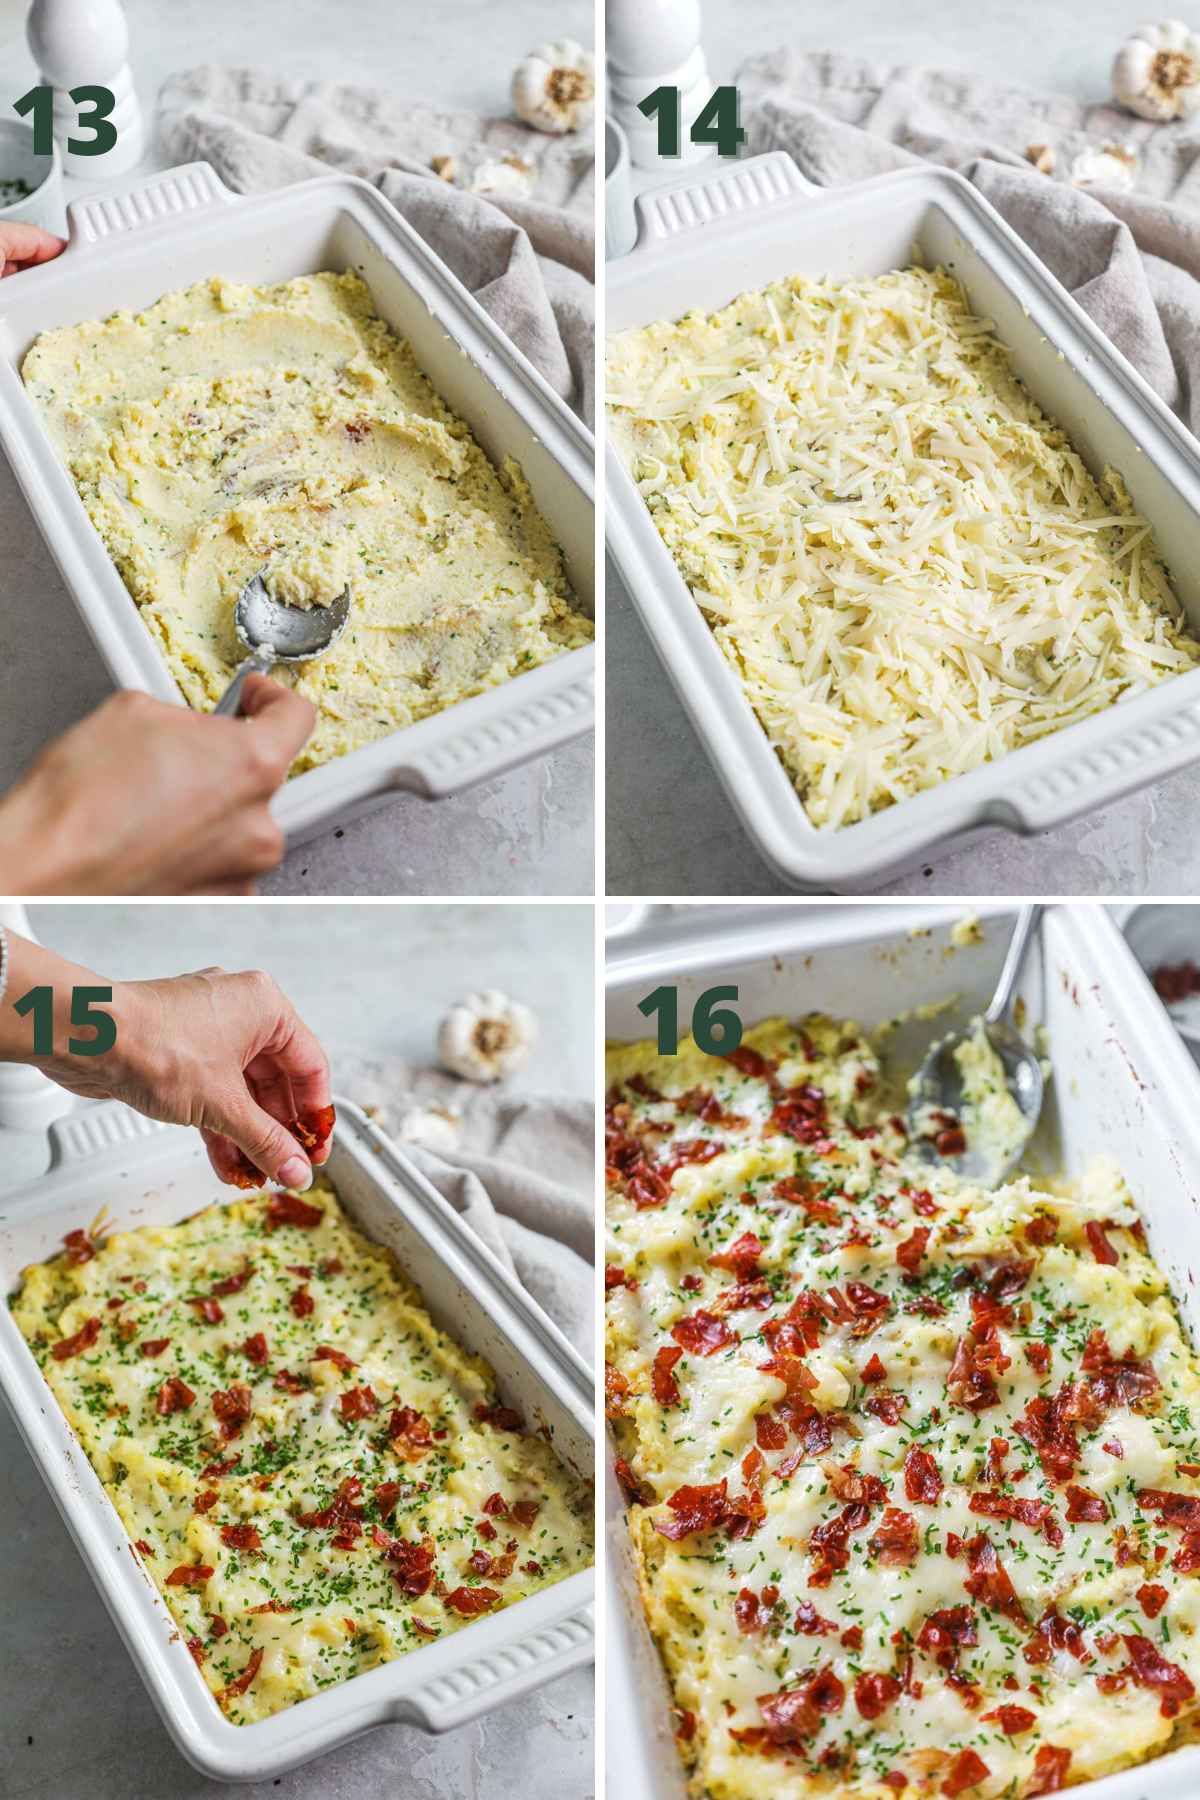 Steps to make twice-baked mashed potatoes, smooth out potatoes; sprinkle with gruyere; bake; top with crispy prosciutto and chives; serve.